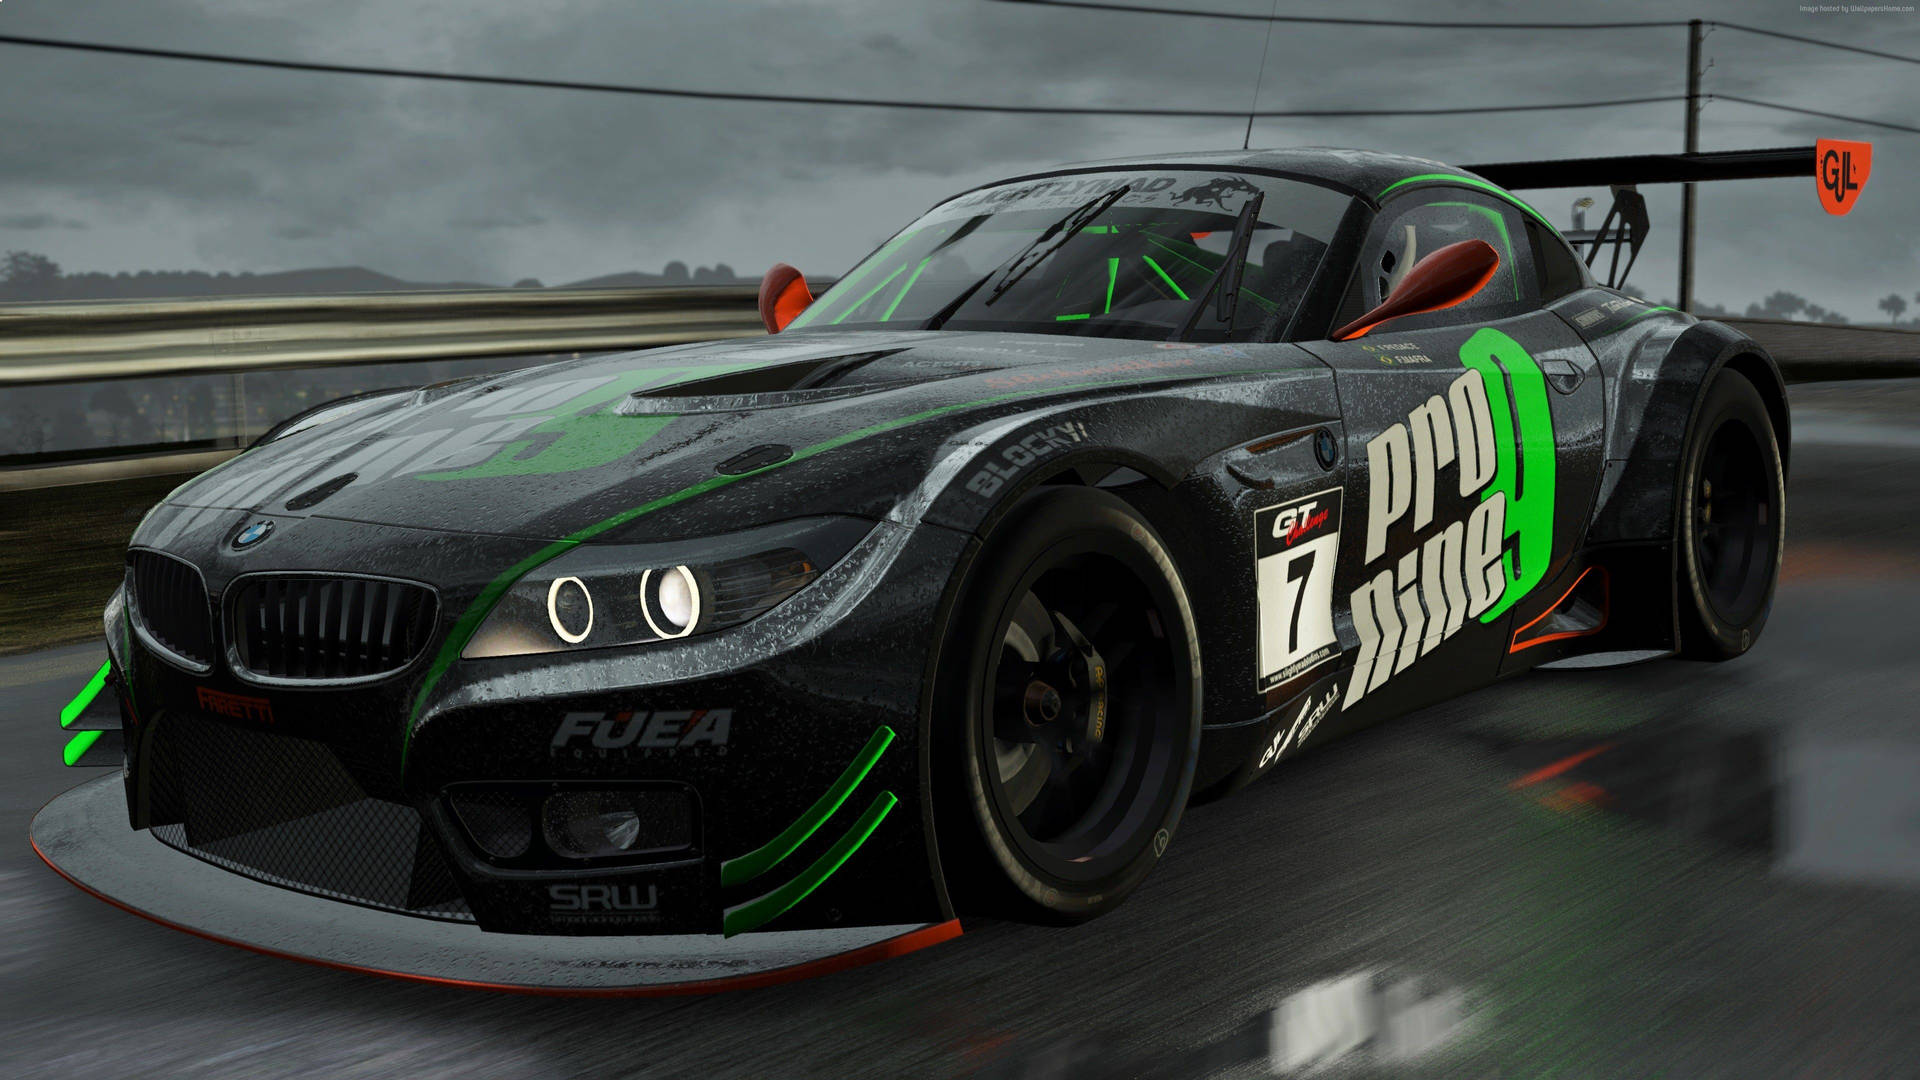 Intense Racing Action with the Black BMW Z4 GT3 in Project Cars Wallpaper